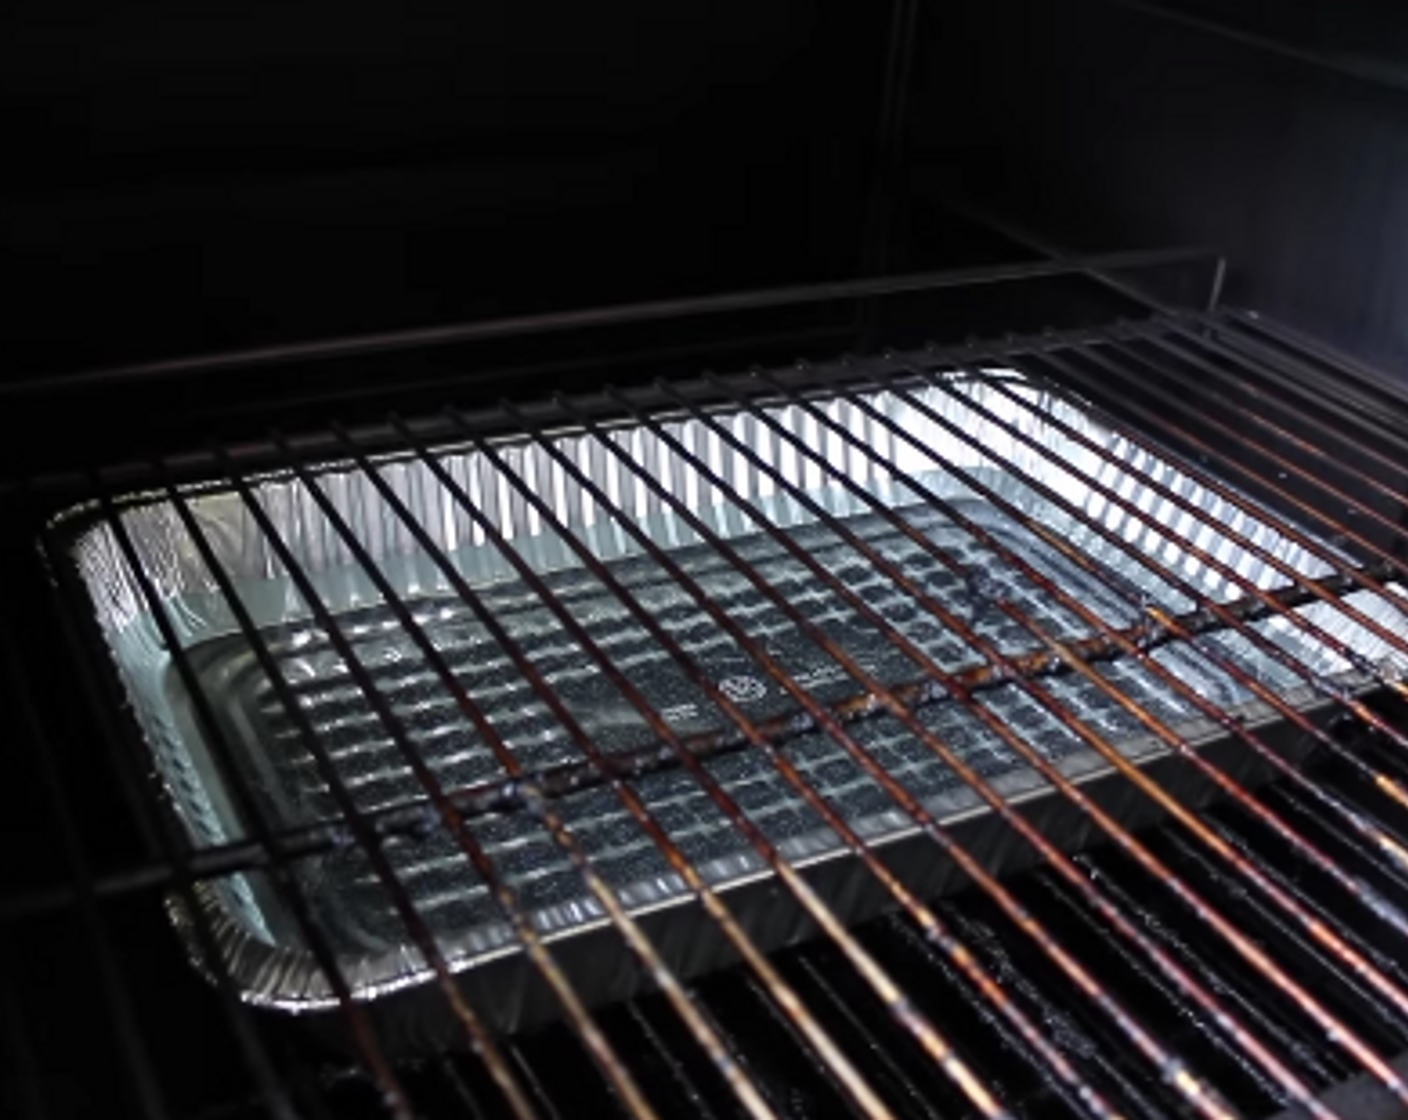 step 3 Place Full Size Aluminum Pan filled half way with water on lower cooking grate. Water Pan should be between cooking grate and heat source for steam.